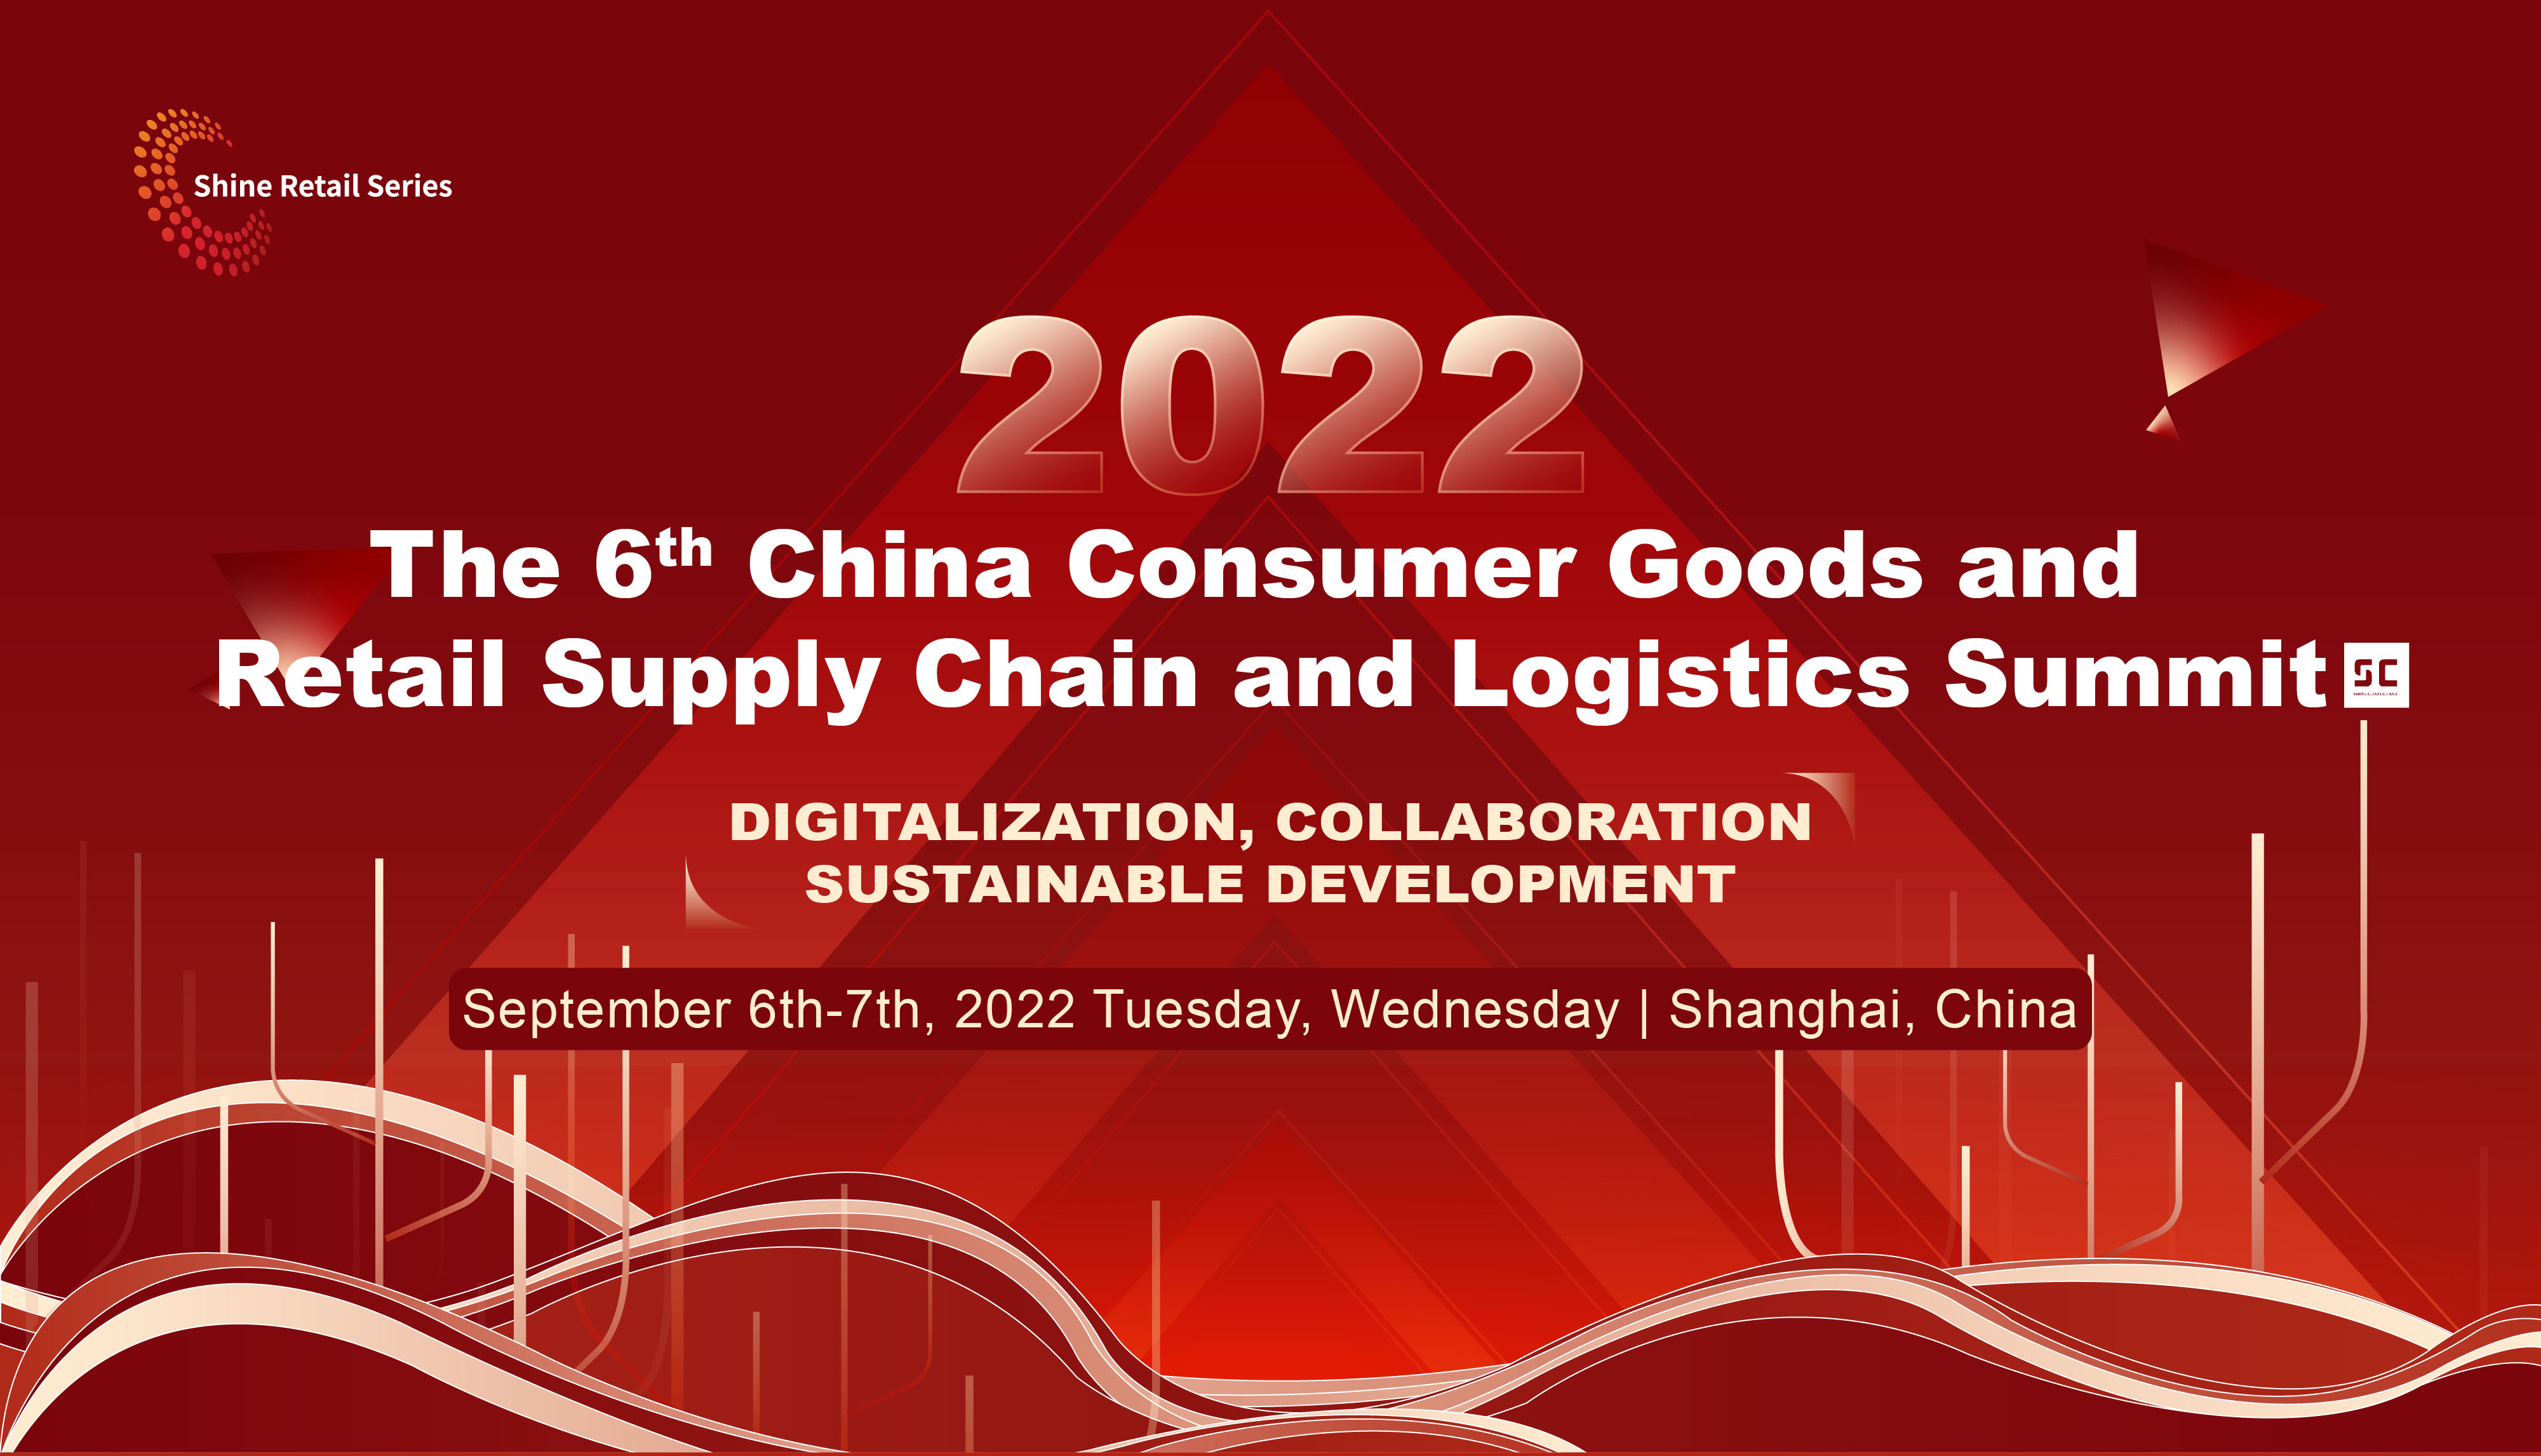 The 6th China Consumer Goods and Retail Supply Chain and Logistics Summit